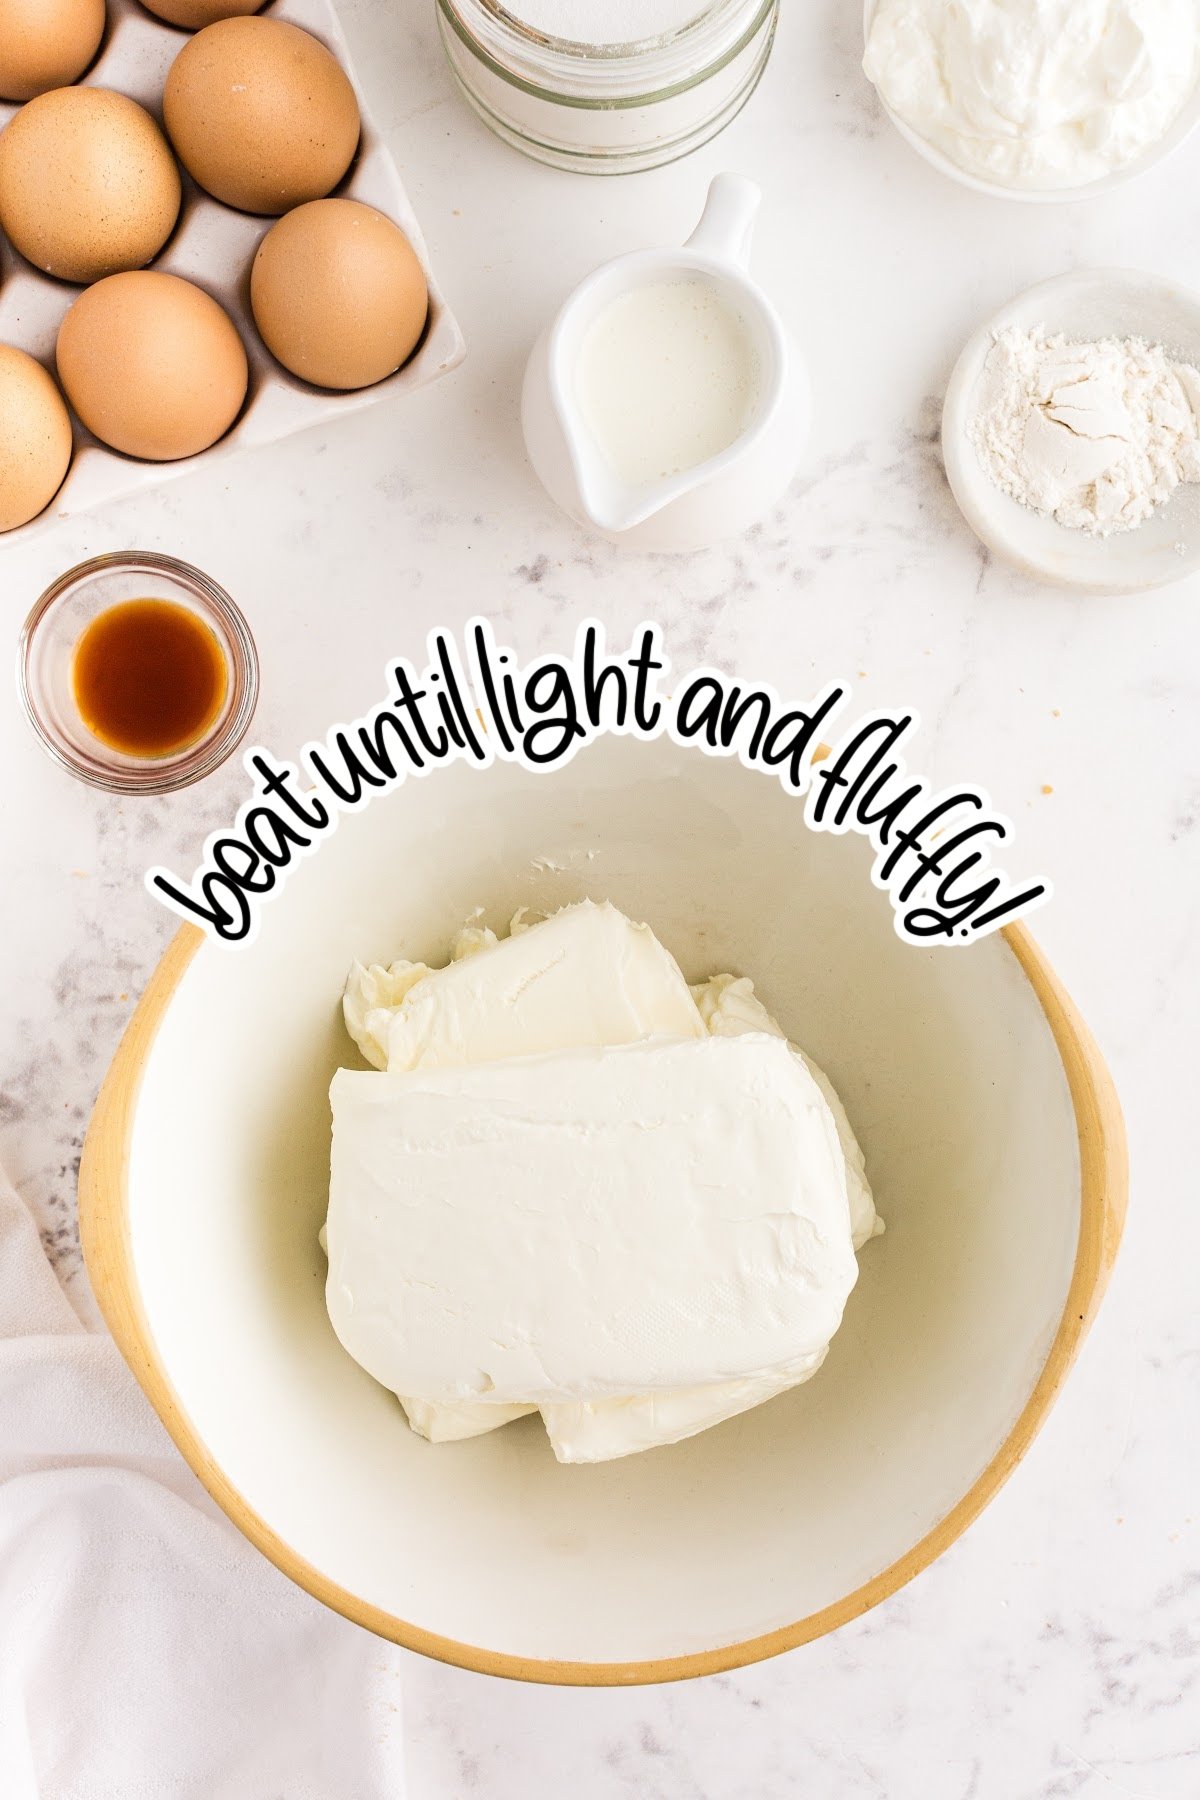 Large bowl with cream cheese blocks and text overlay "beat until light and fluffy."